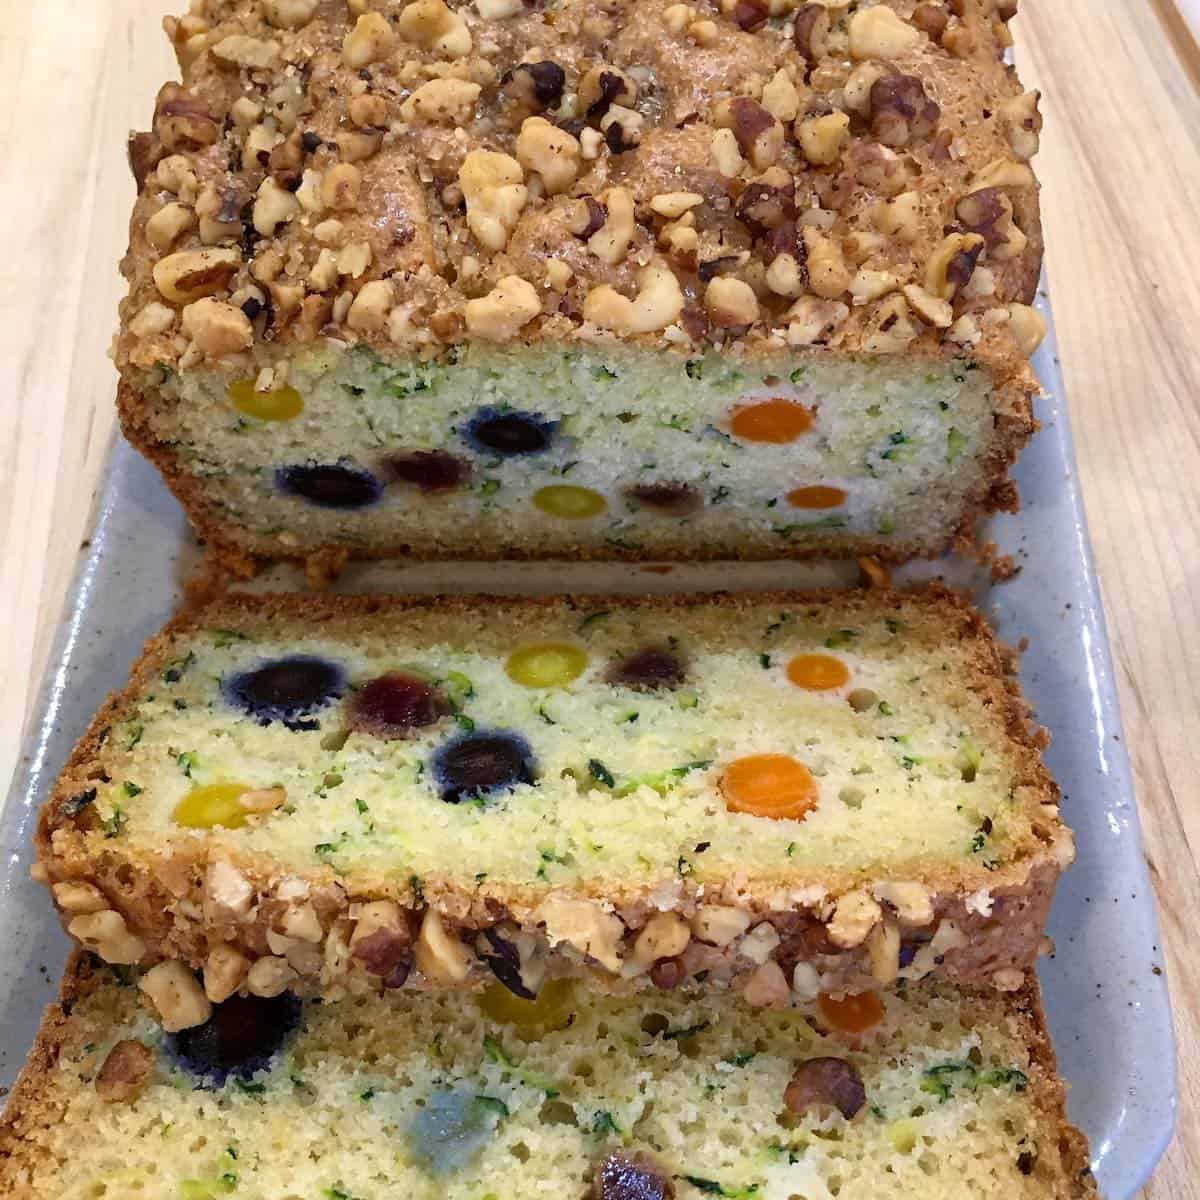 sliced loaf exposes the pretty vegetables inside the funfetti zucchini bread